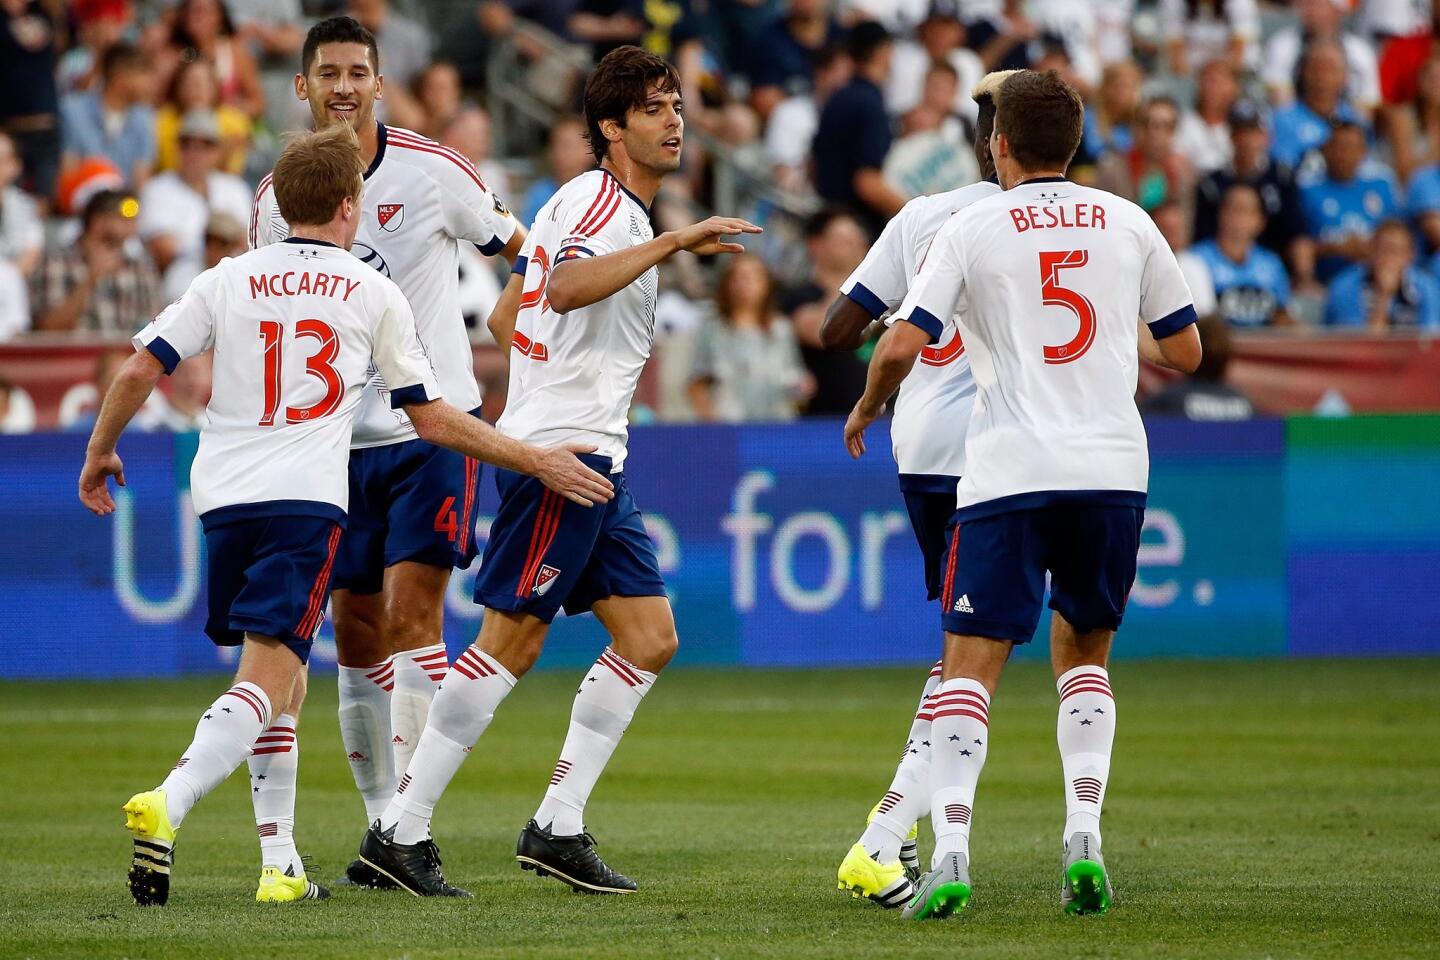 COMMERCE CITY, CO - JULY 29: Kaka #22 of MLS All-Stars celebrates after striking a penalty kick for a goal in the 20th minute to take a 1-0 lead over the Tottenham Hotspur during the 2015 AT&T Major League Soccer All-Star game at Dick's Sporting Goods Park on July 29, 2015 in Commerce City, Colorado. The MLS All-Stars defeated Tottenham Hotspur 2-1. (Photo by Doug Pensinger/Getty Images) ** OUTS - ELSENT, FPG - OUTS * NM, PH, VA if sourced by CT, LA or MoD **